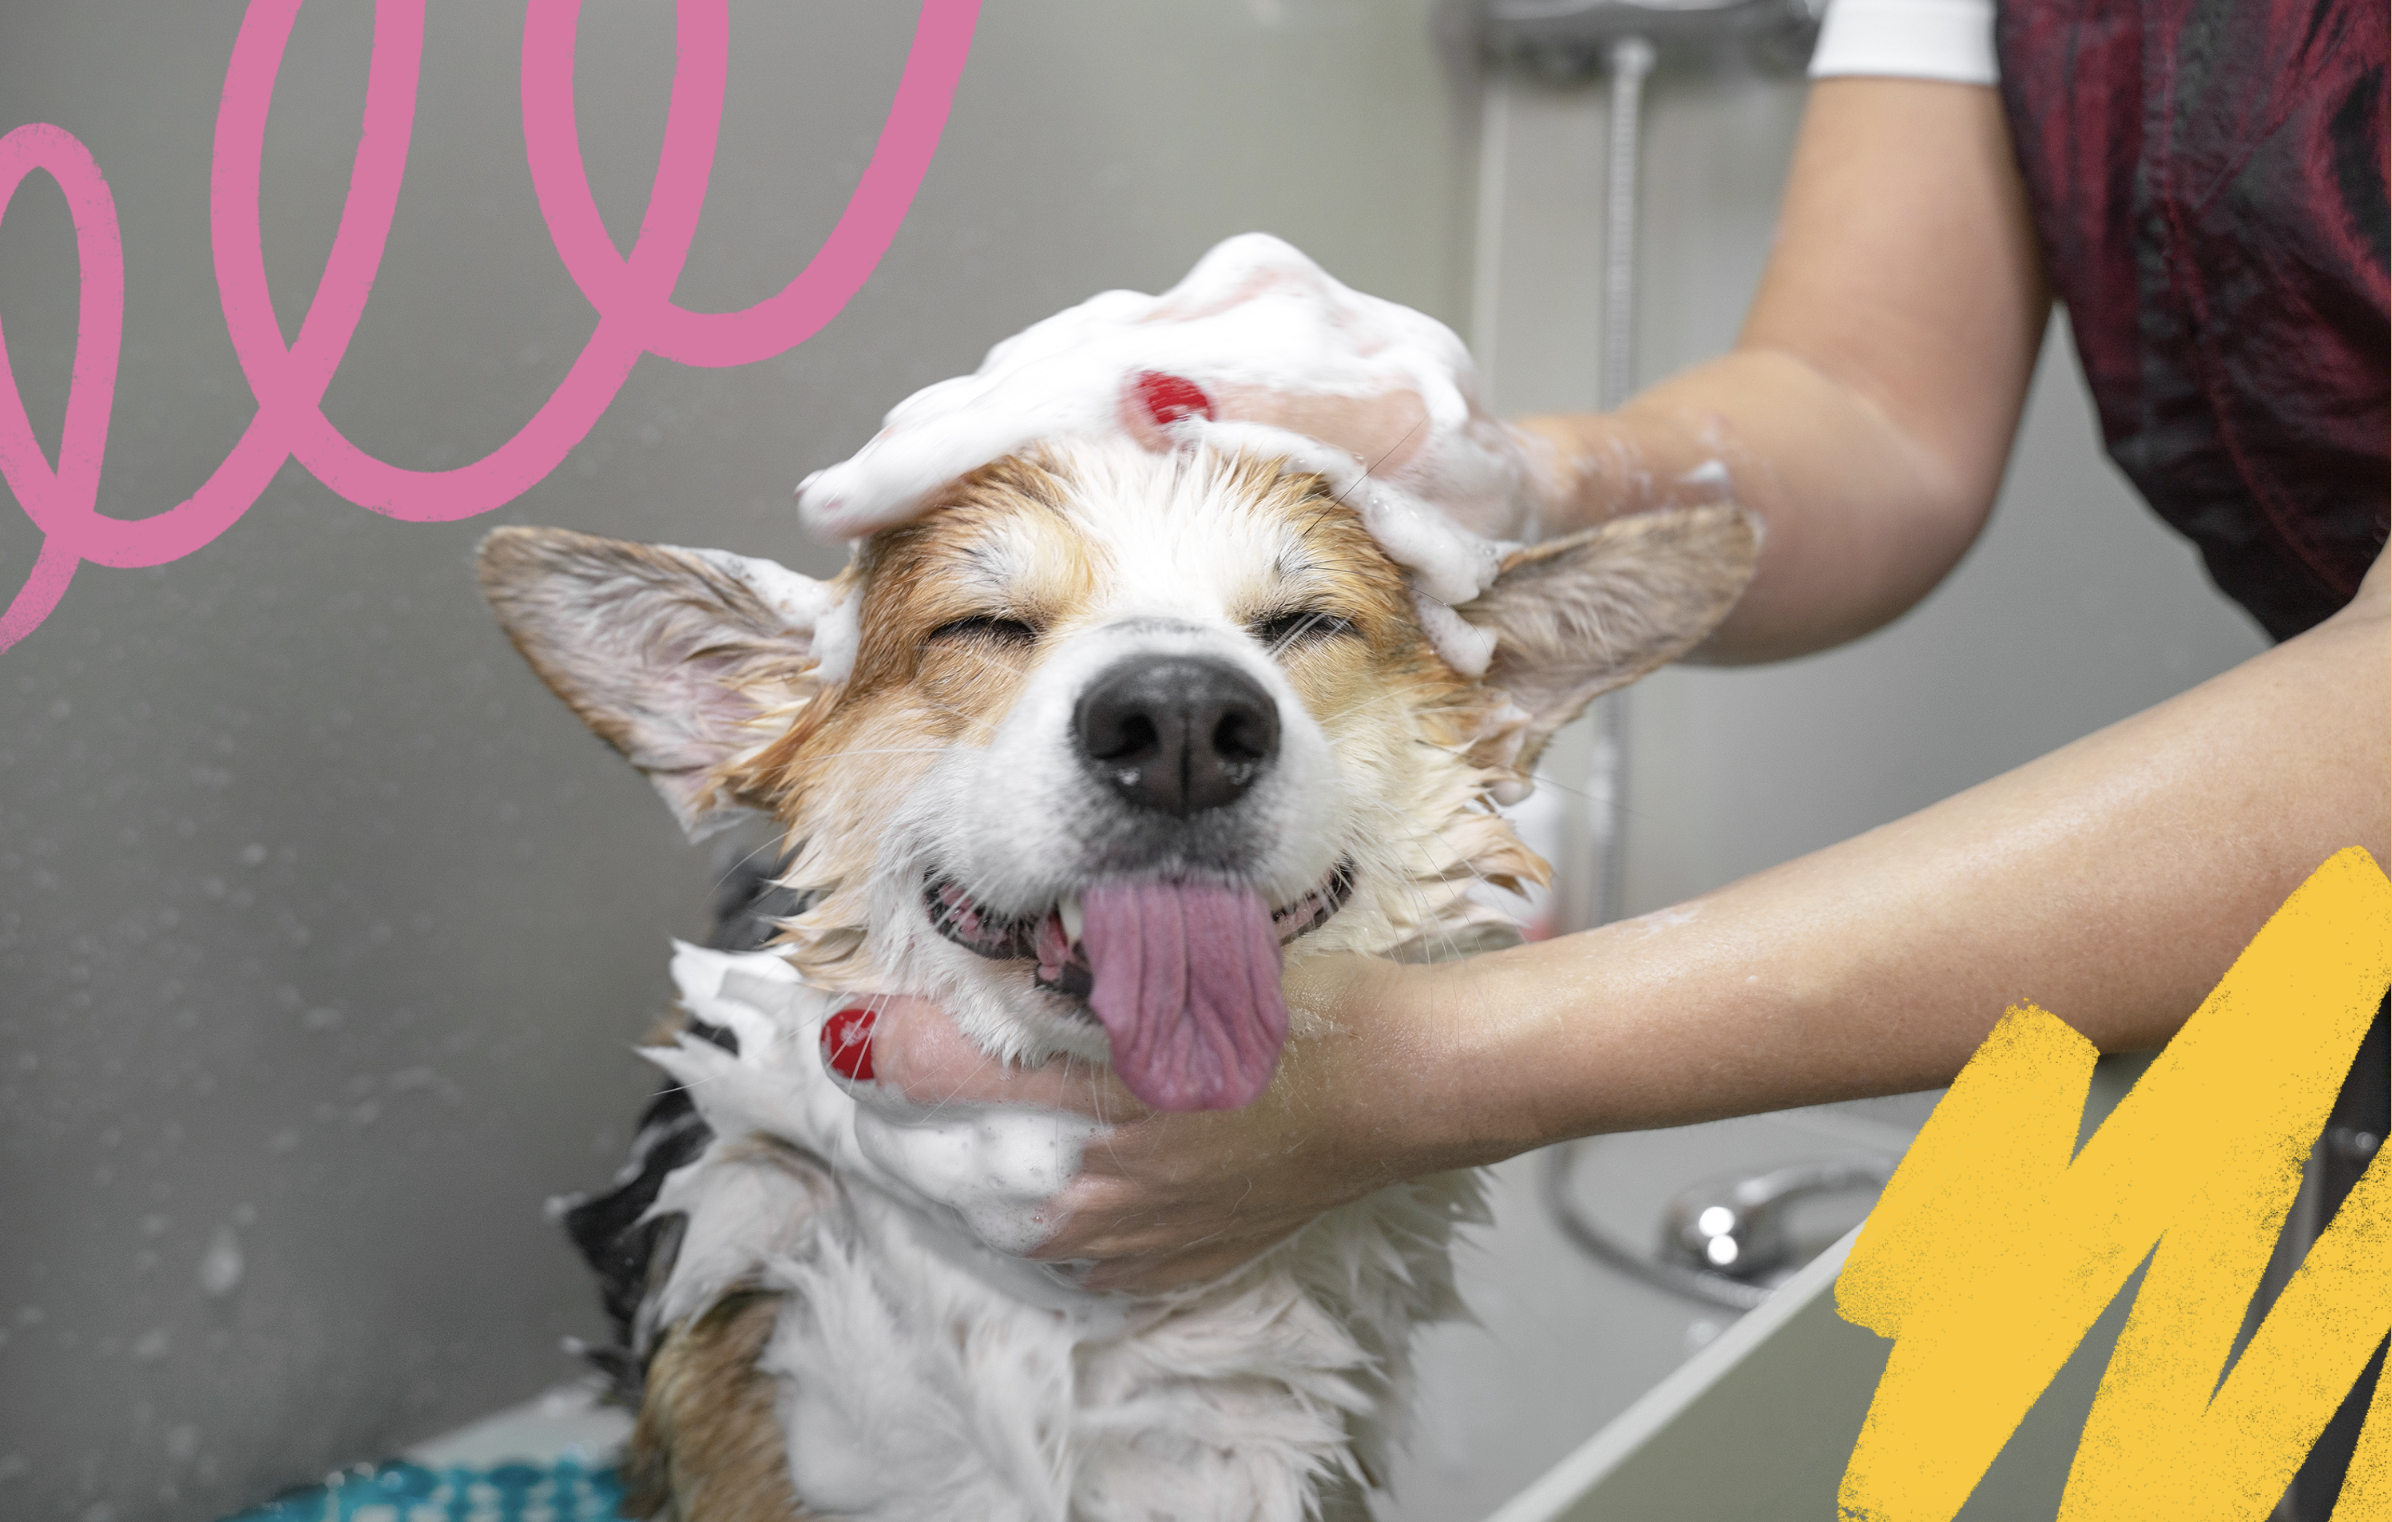 Grooming can be relaxing for a dog - happy dog getting a bath at groomer